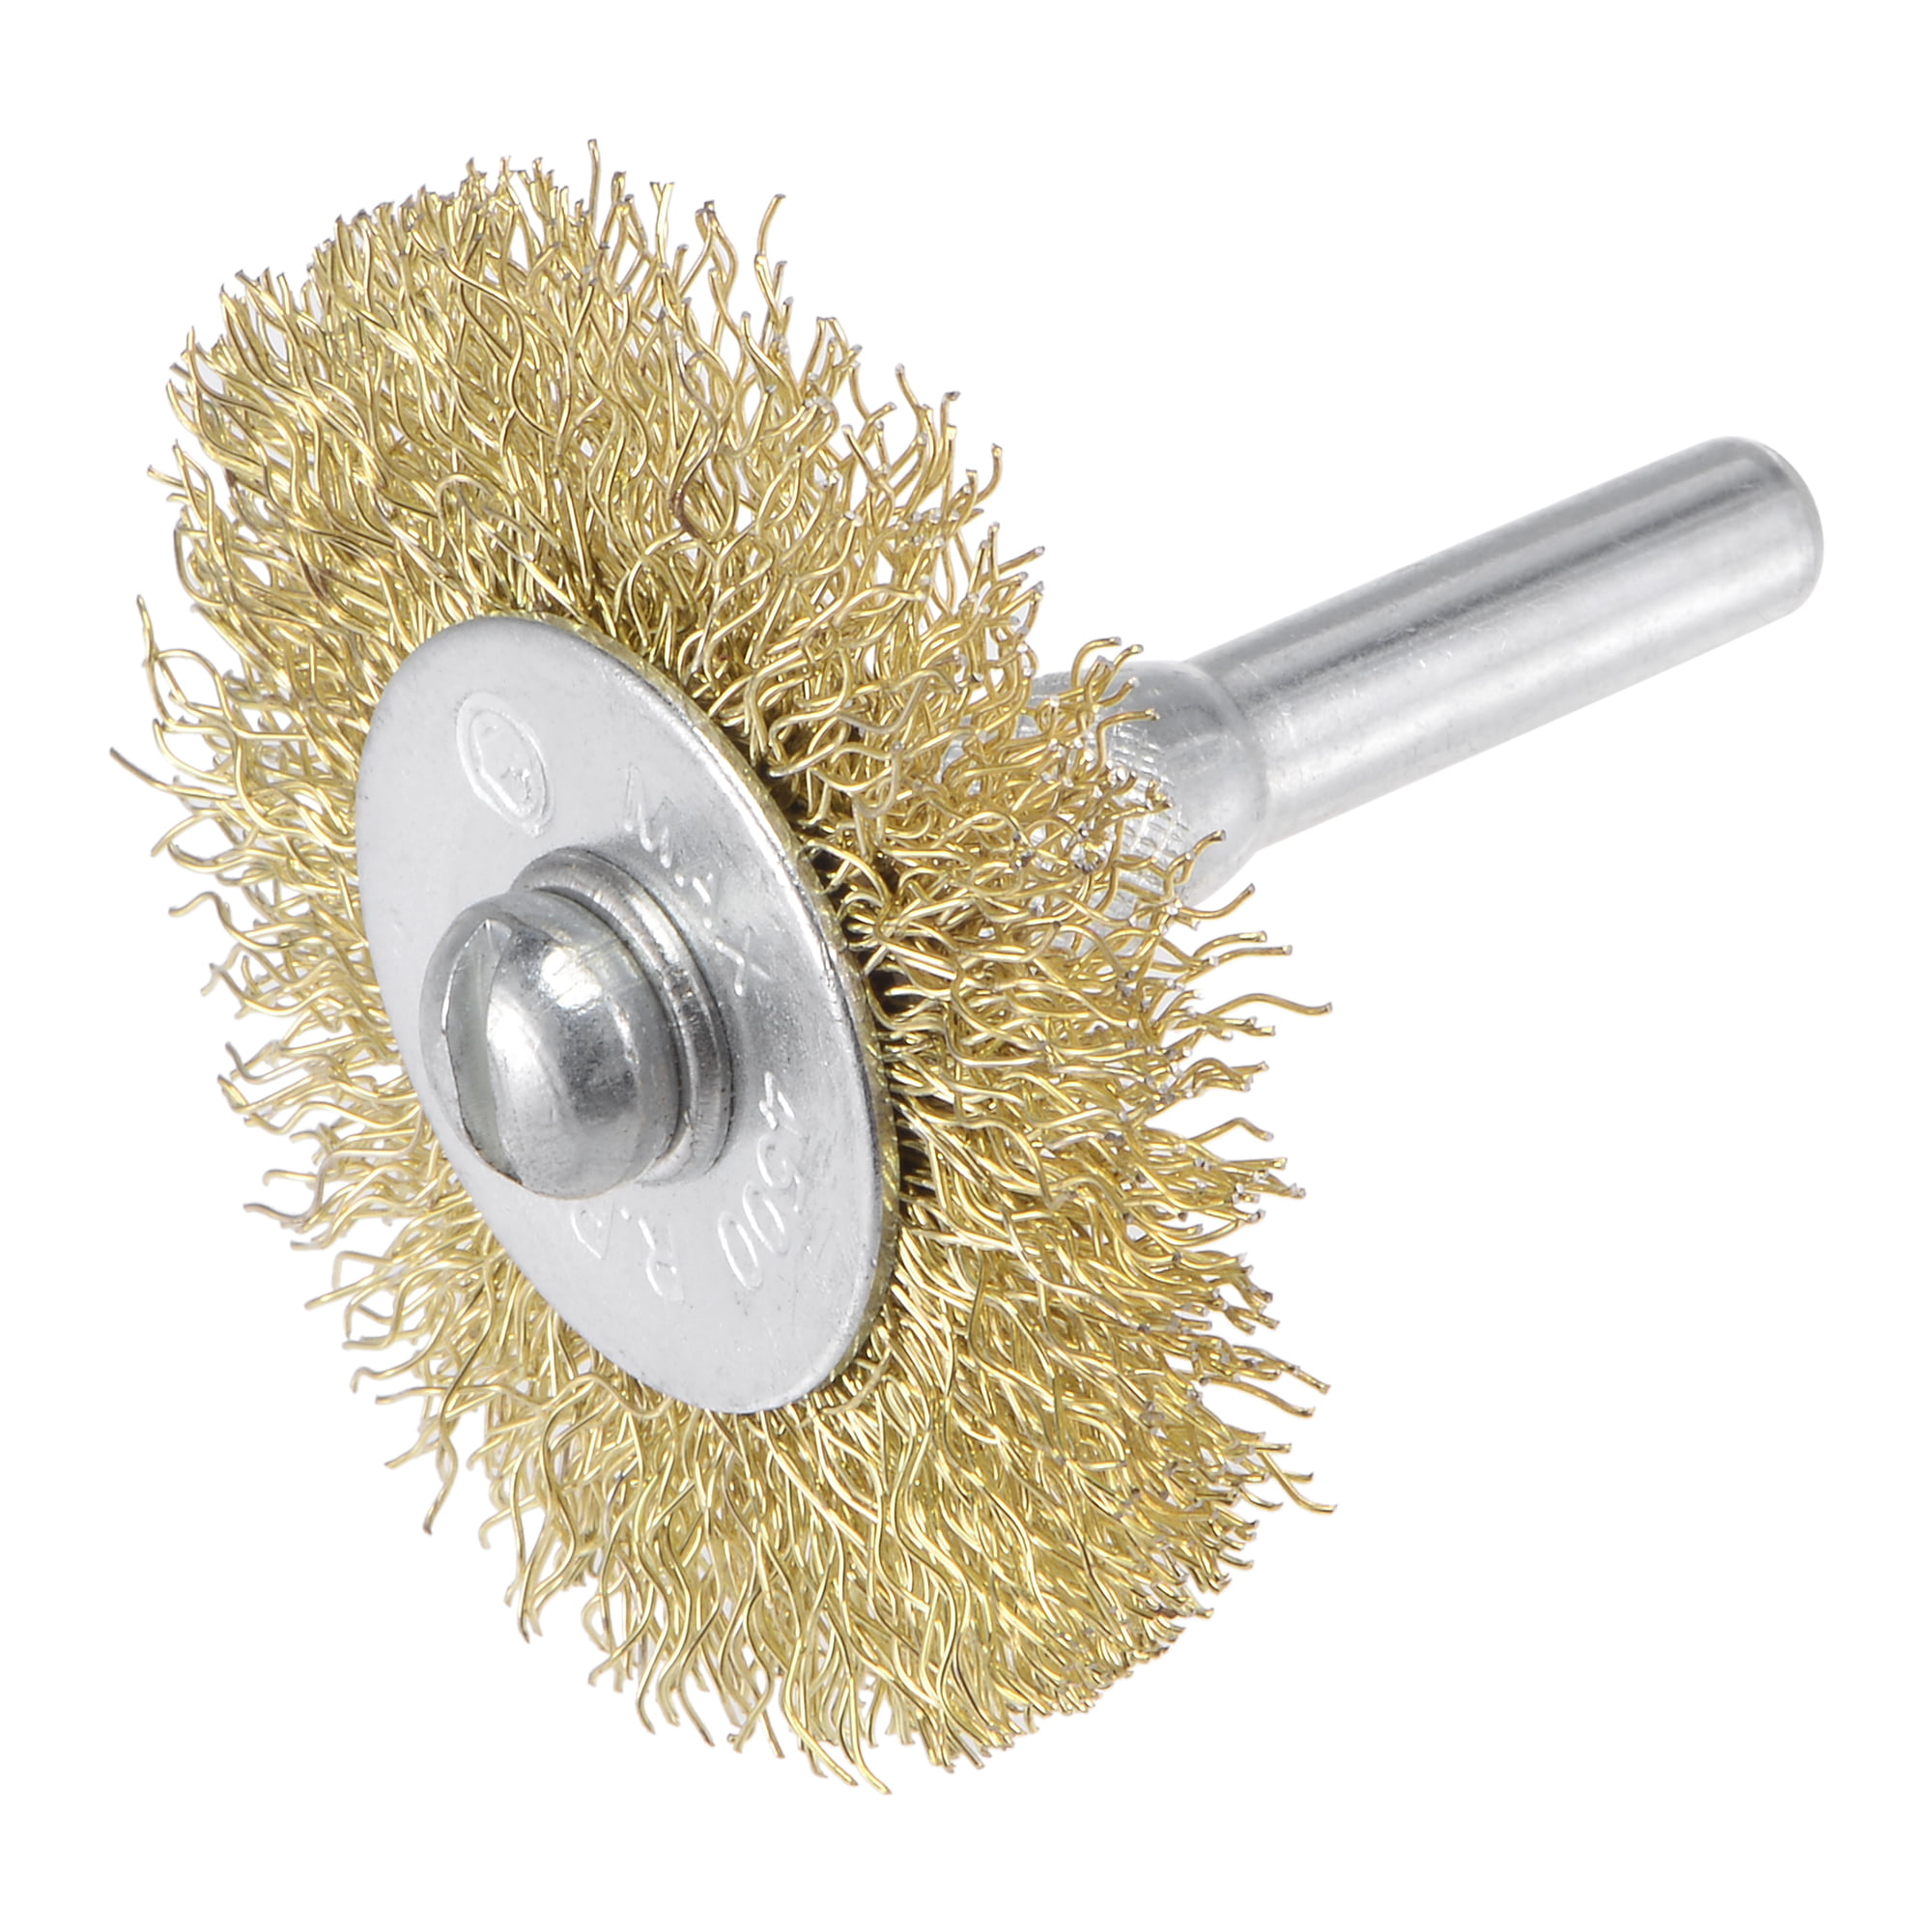 50mm /100mm Wide Flat Steel Wire Brush for Drills Brass Coated Rust Remover 